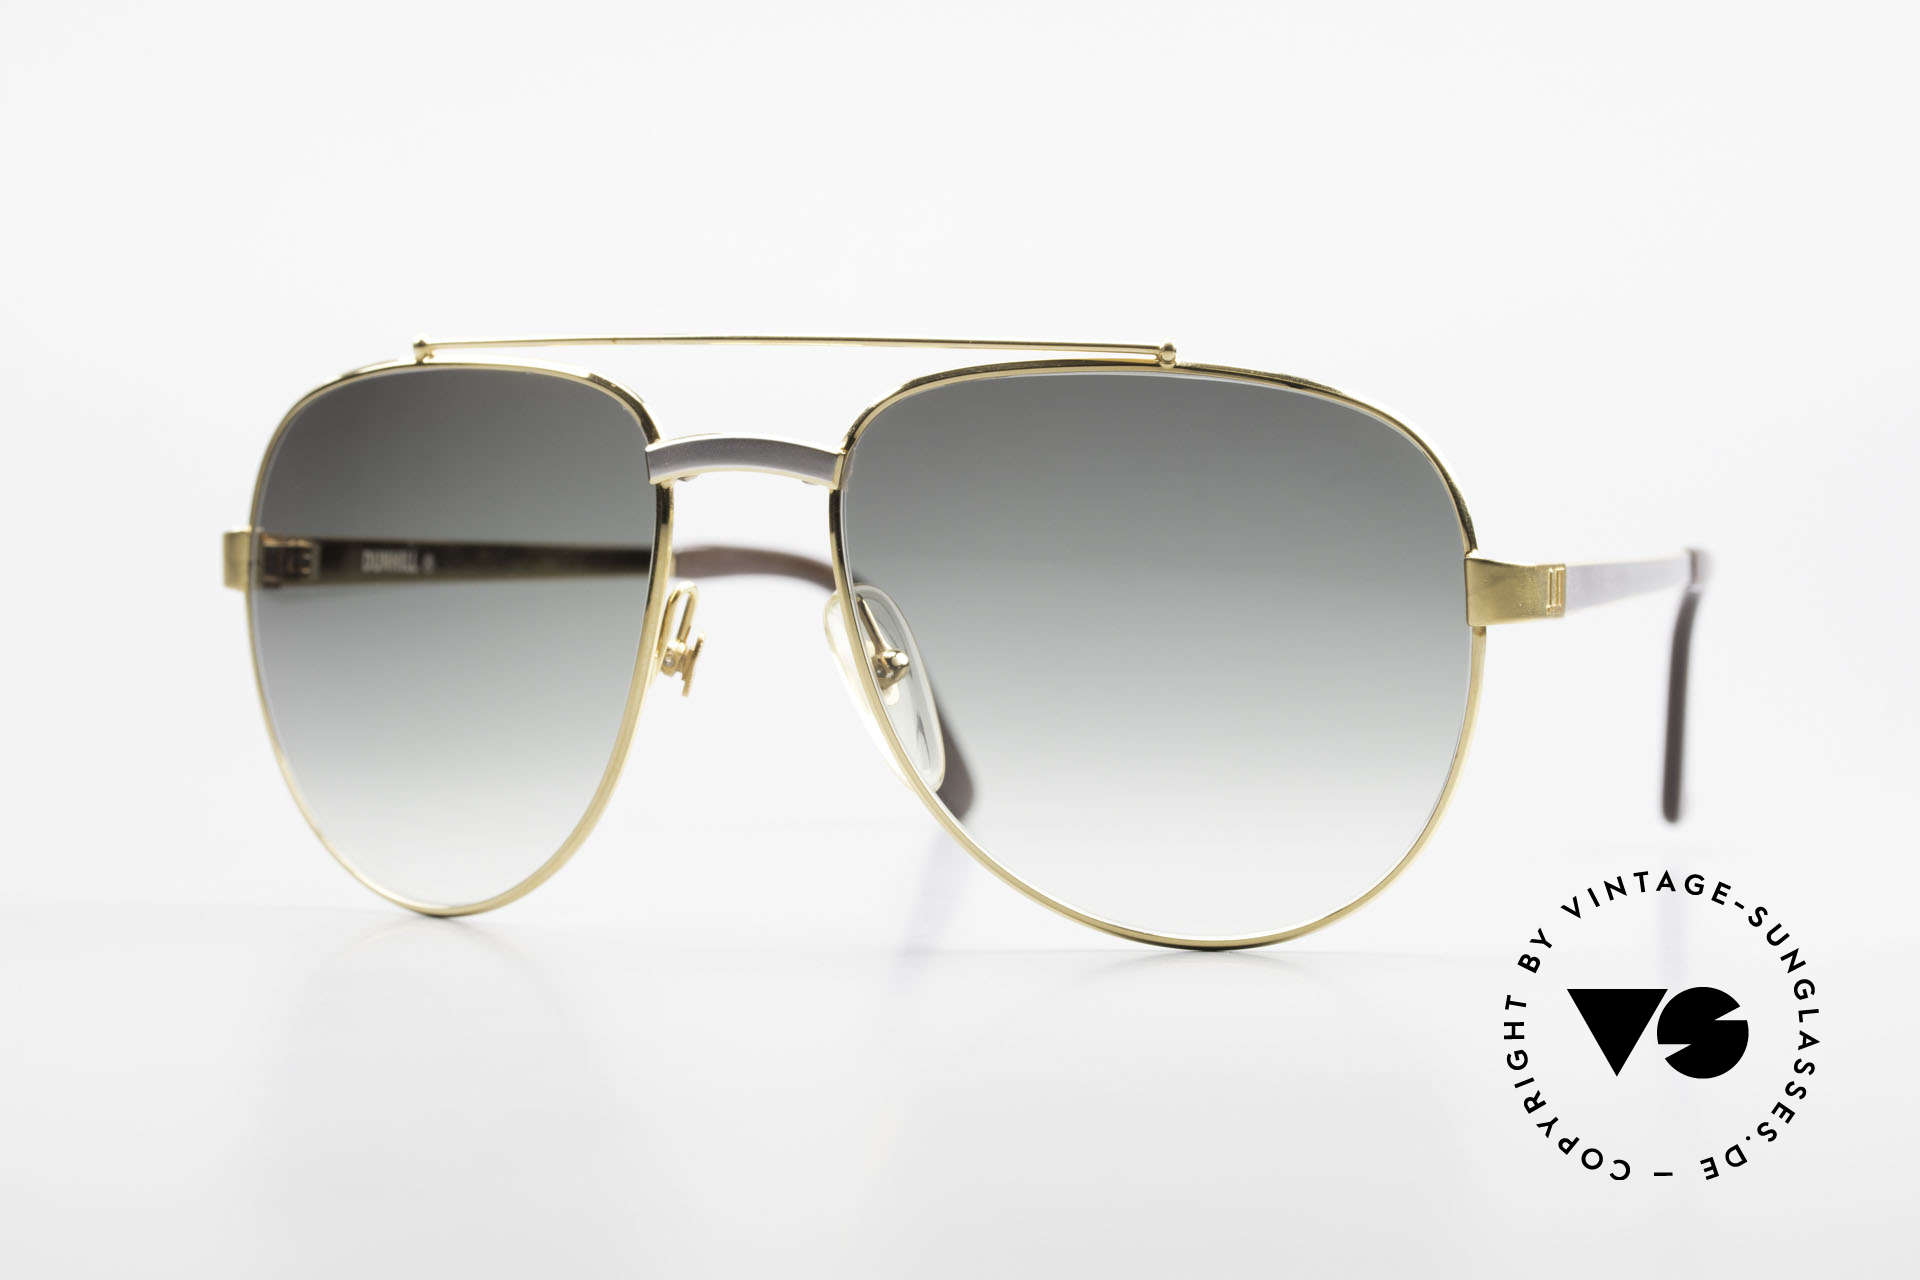 Dunhill 6029 Gold Plated Luxury Sunglasses, brilliant Comfort-Fit: hinges joint on the bridge, Made for Men